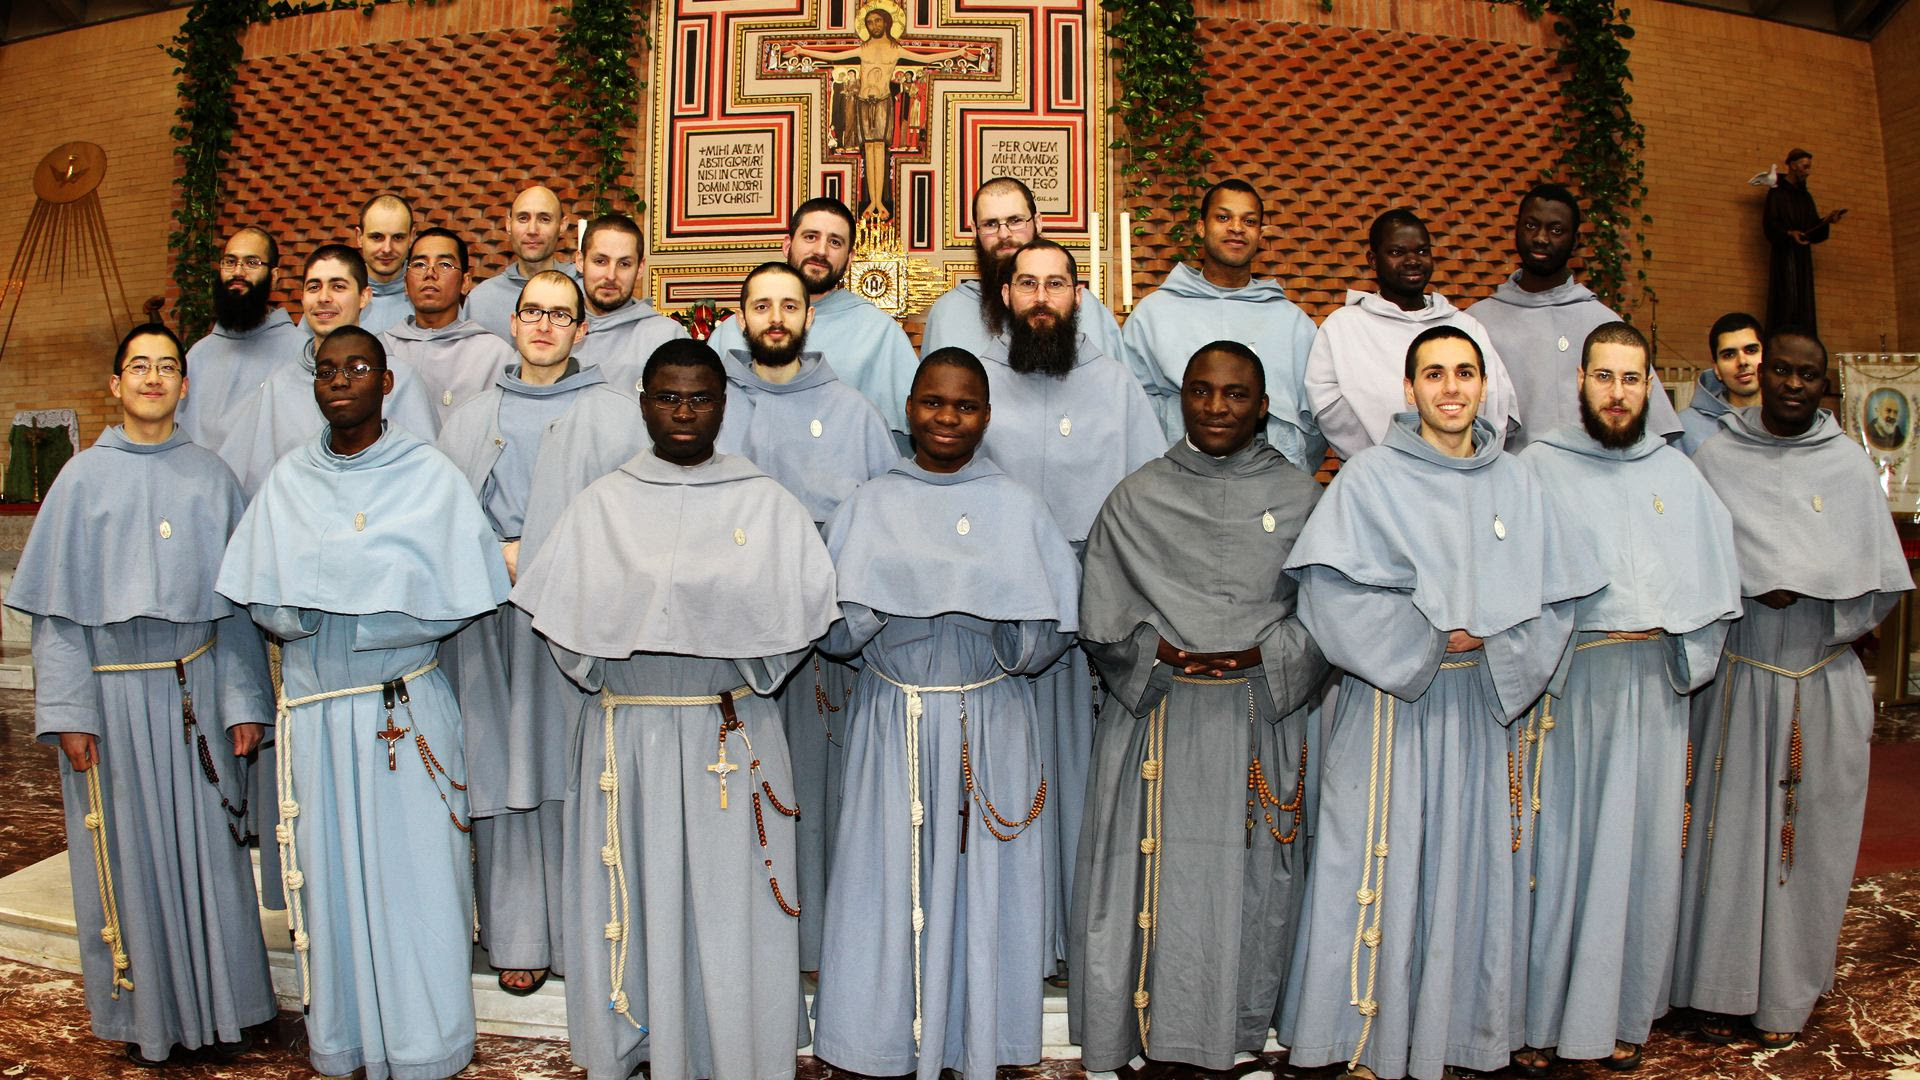 Image result for "Franciscans of the Immaculate" benedict